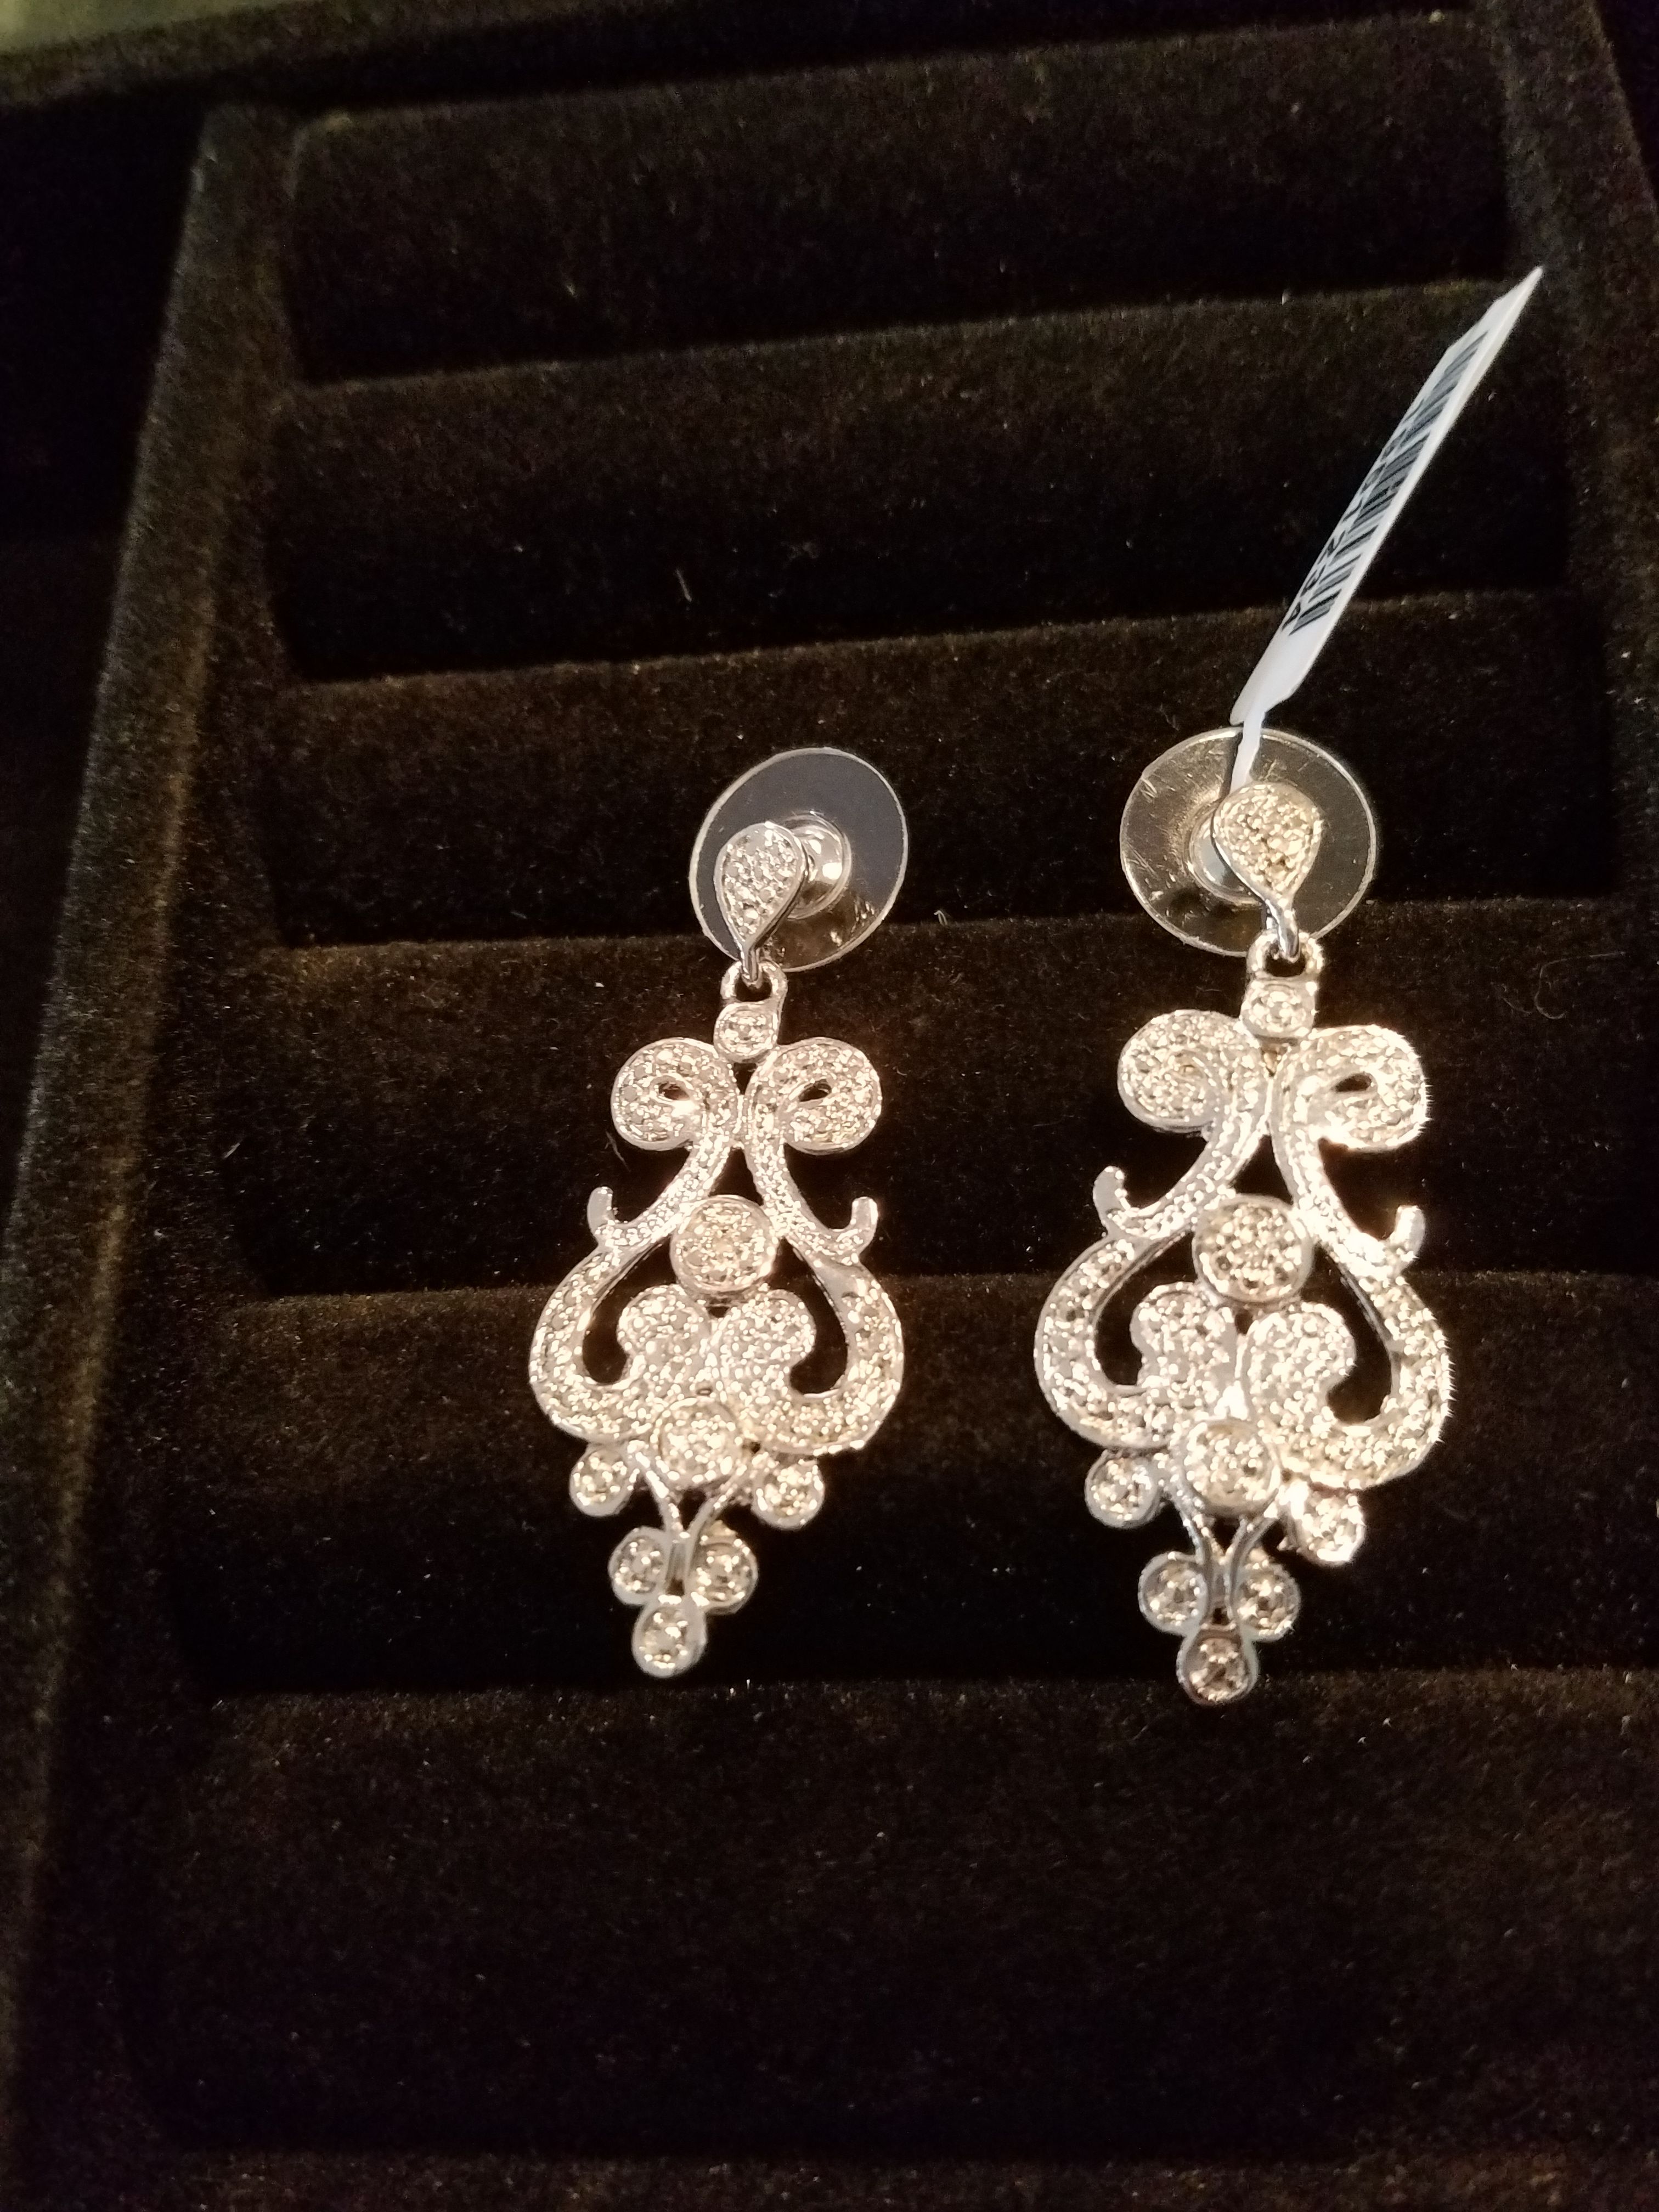 Sterling silver with Diamond accents earrings